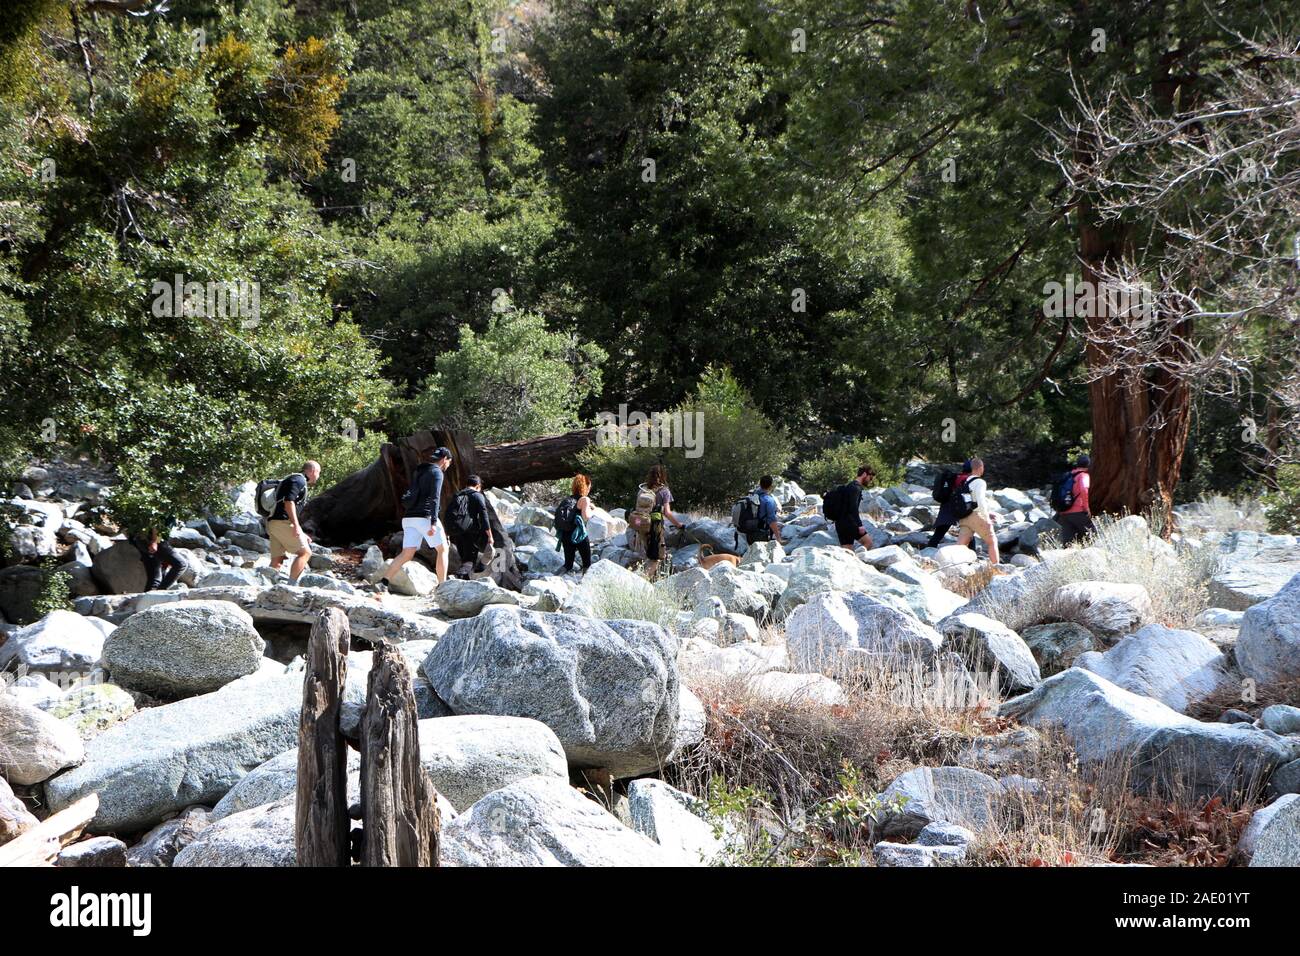 The procession of hikers in the Mountain San Antonio, Los Angeles, California Stock Photo